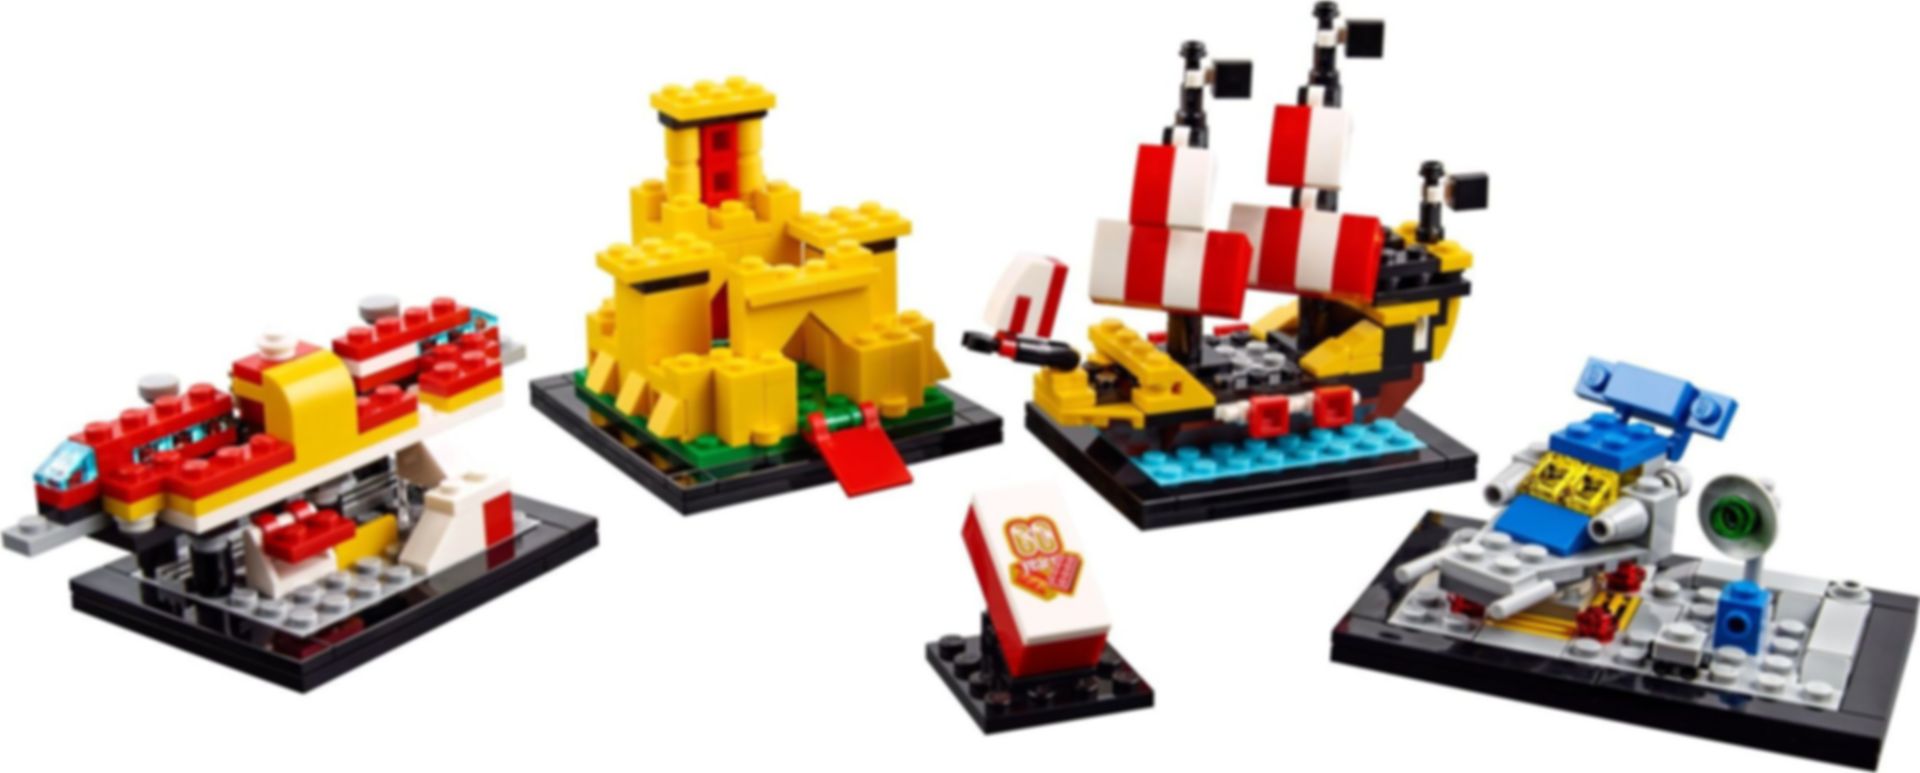 60 Years of the LEGO Brick components